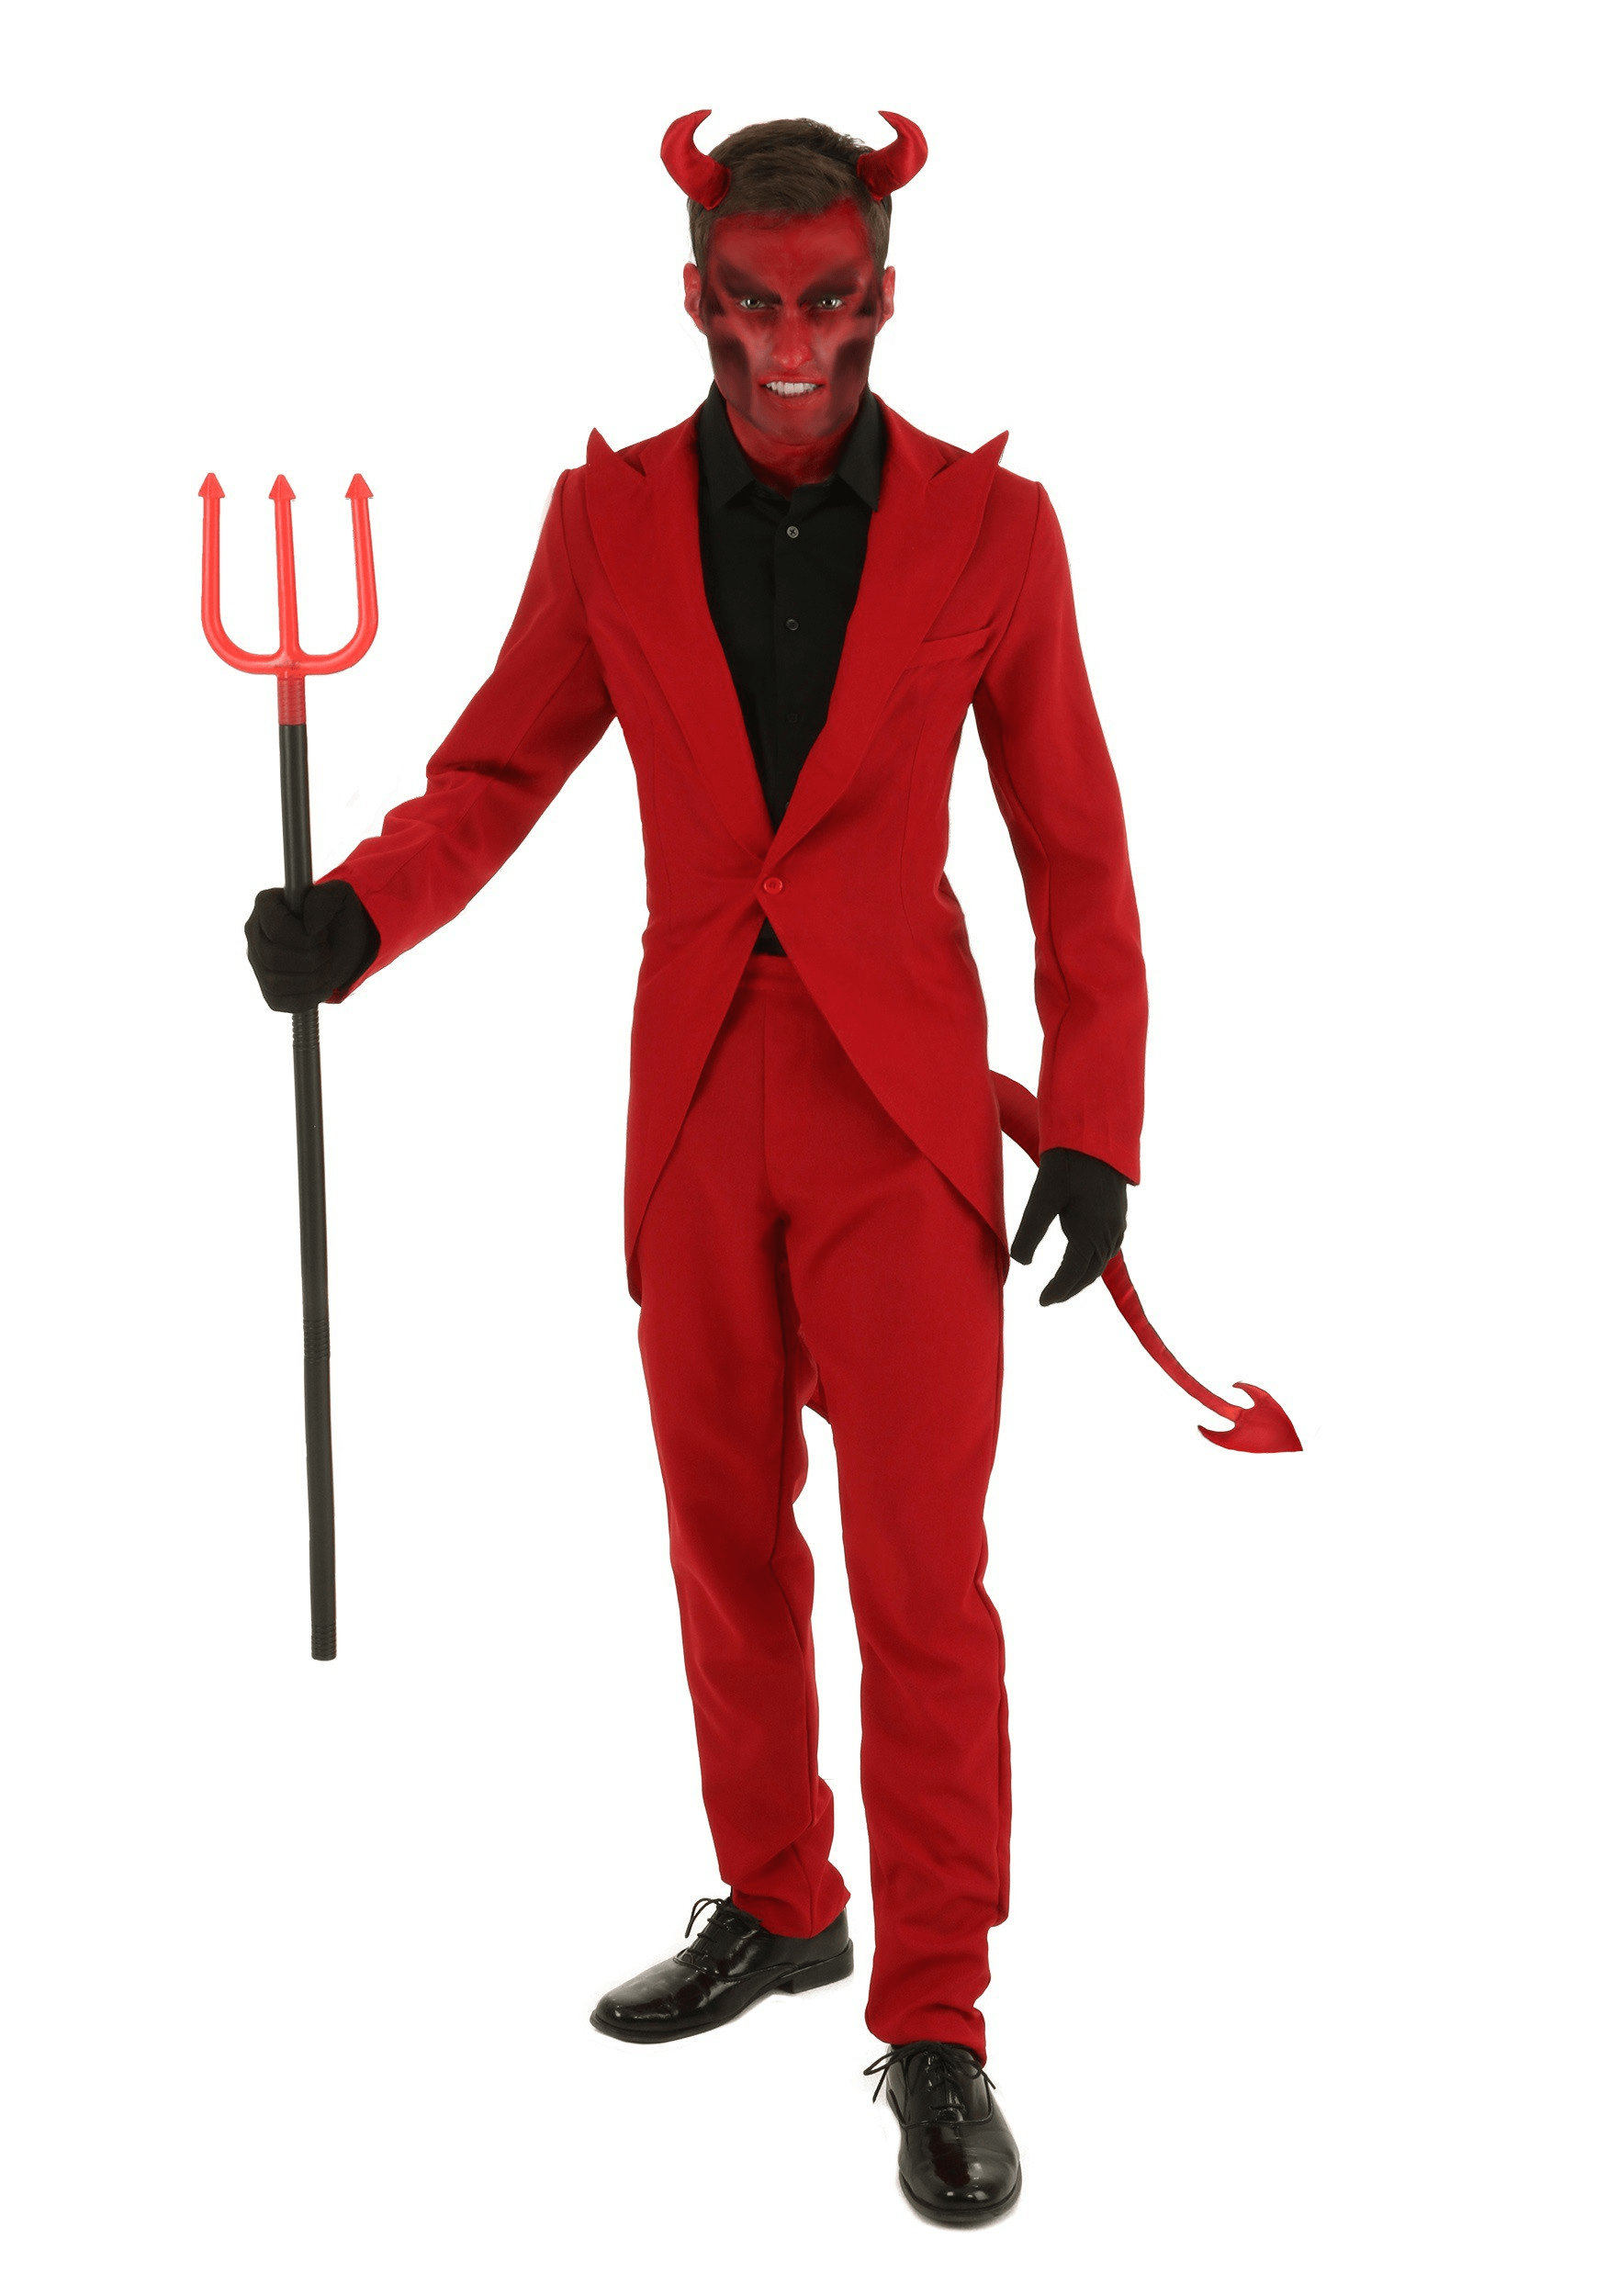 Spikey Red Devil Fancy Dress Wig Halloween Mens Costume Outfit Adult Accessory 